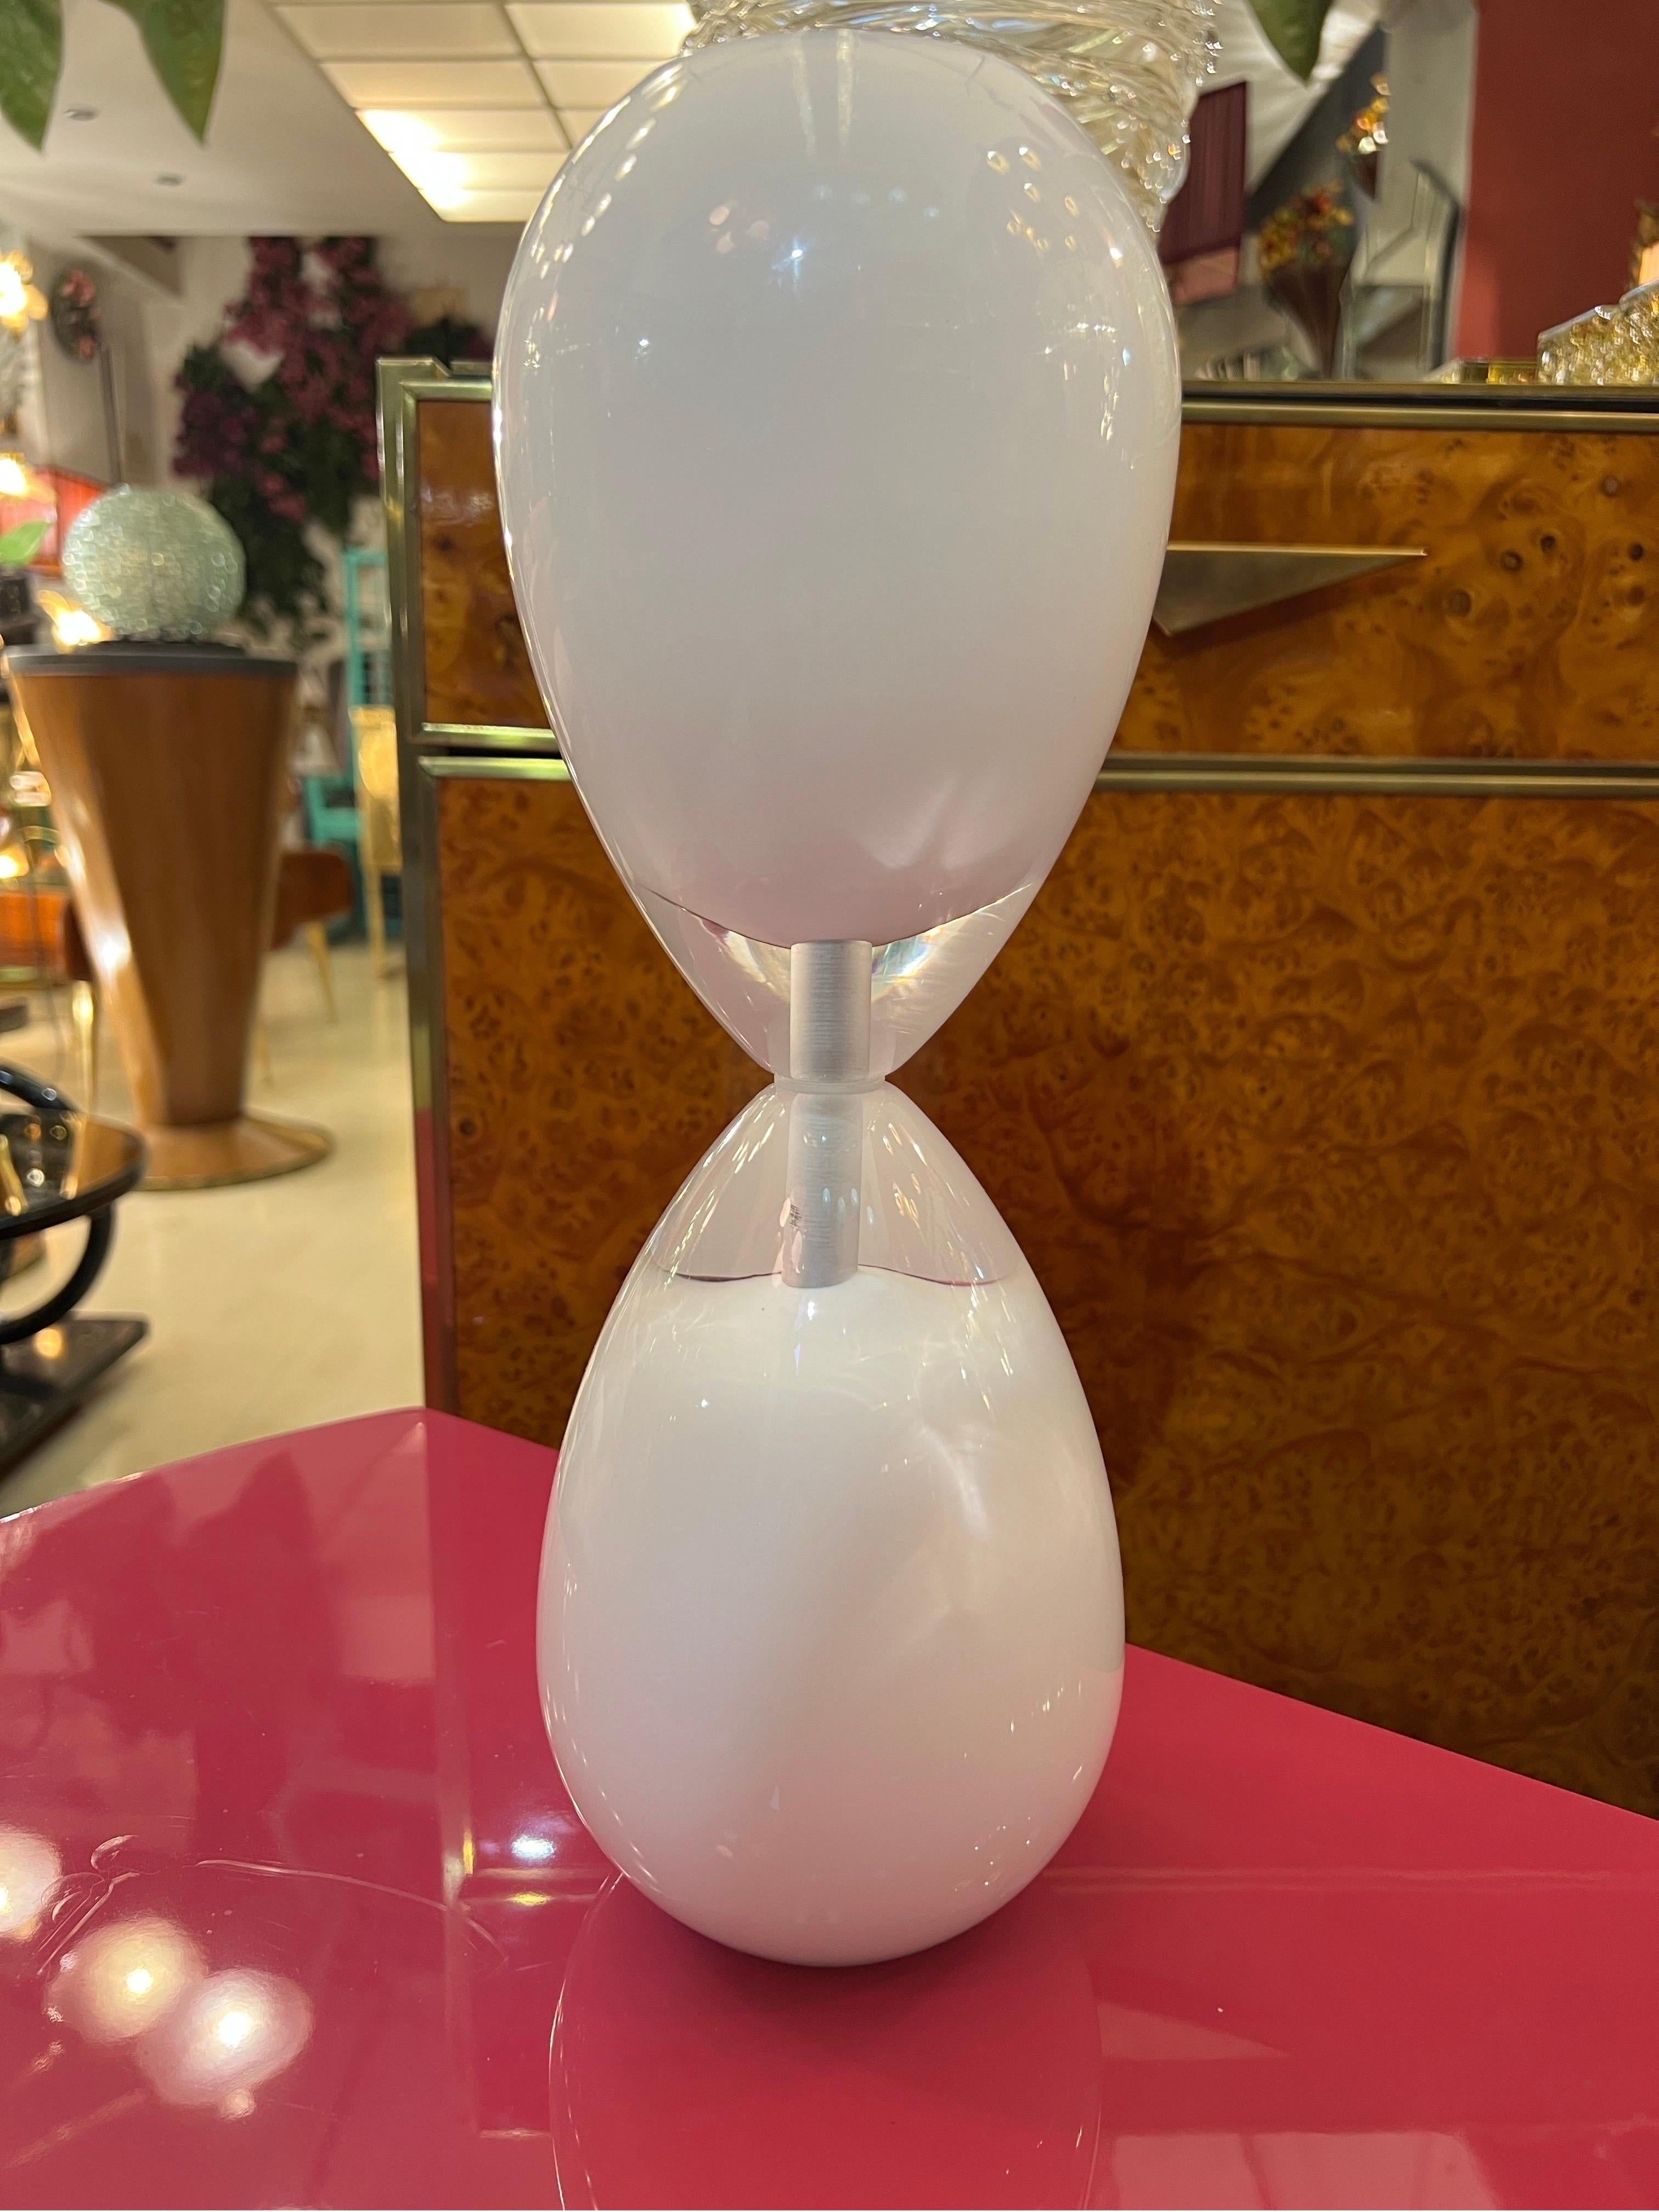 European Pair of Mid- Century White Murano Glass Hourglass Table Lamps, 1950s For Sale